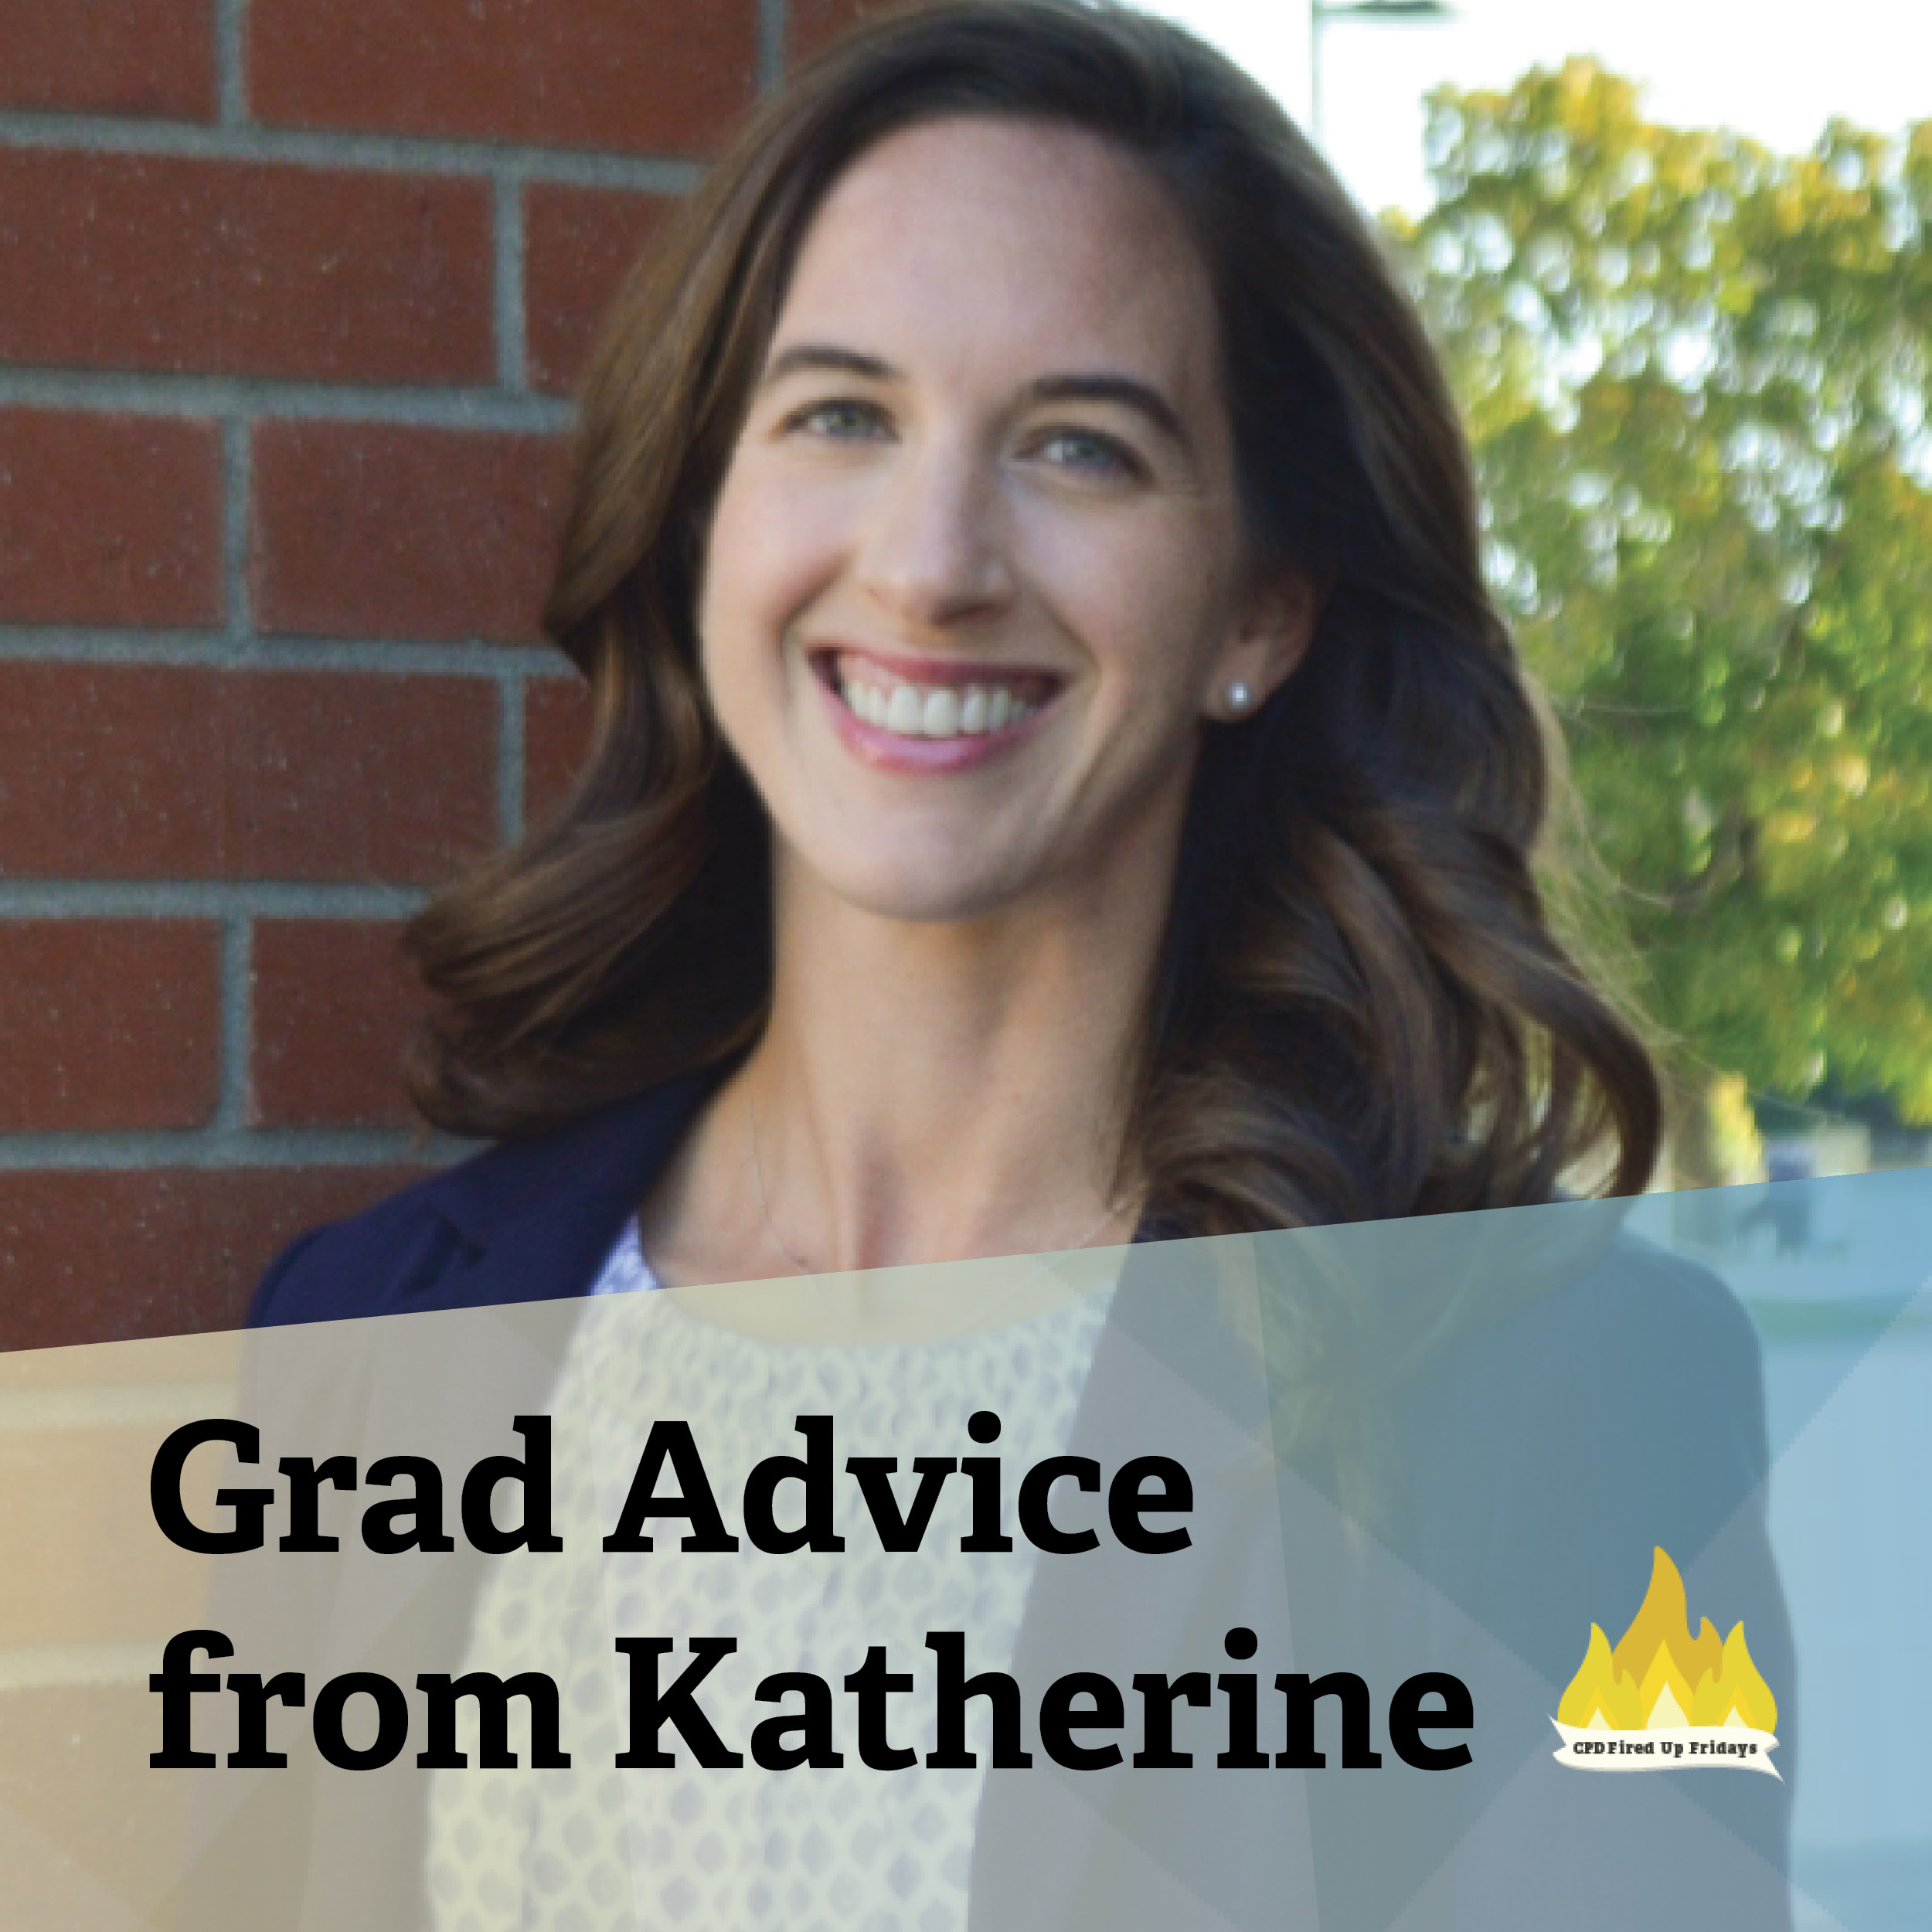 Katherine Brackmann stands in front of a brick pillar wearing a white blouse and a navy blazer. The text underneath reads: 'Grad Advice from Katherine.'